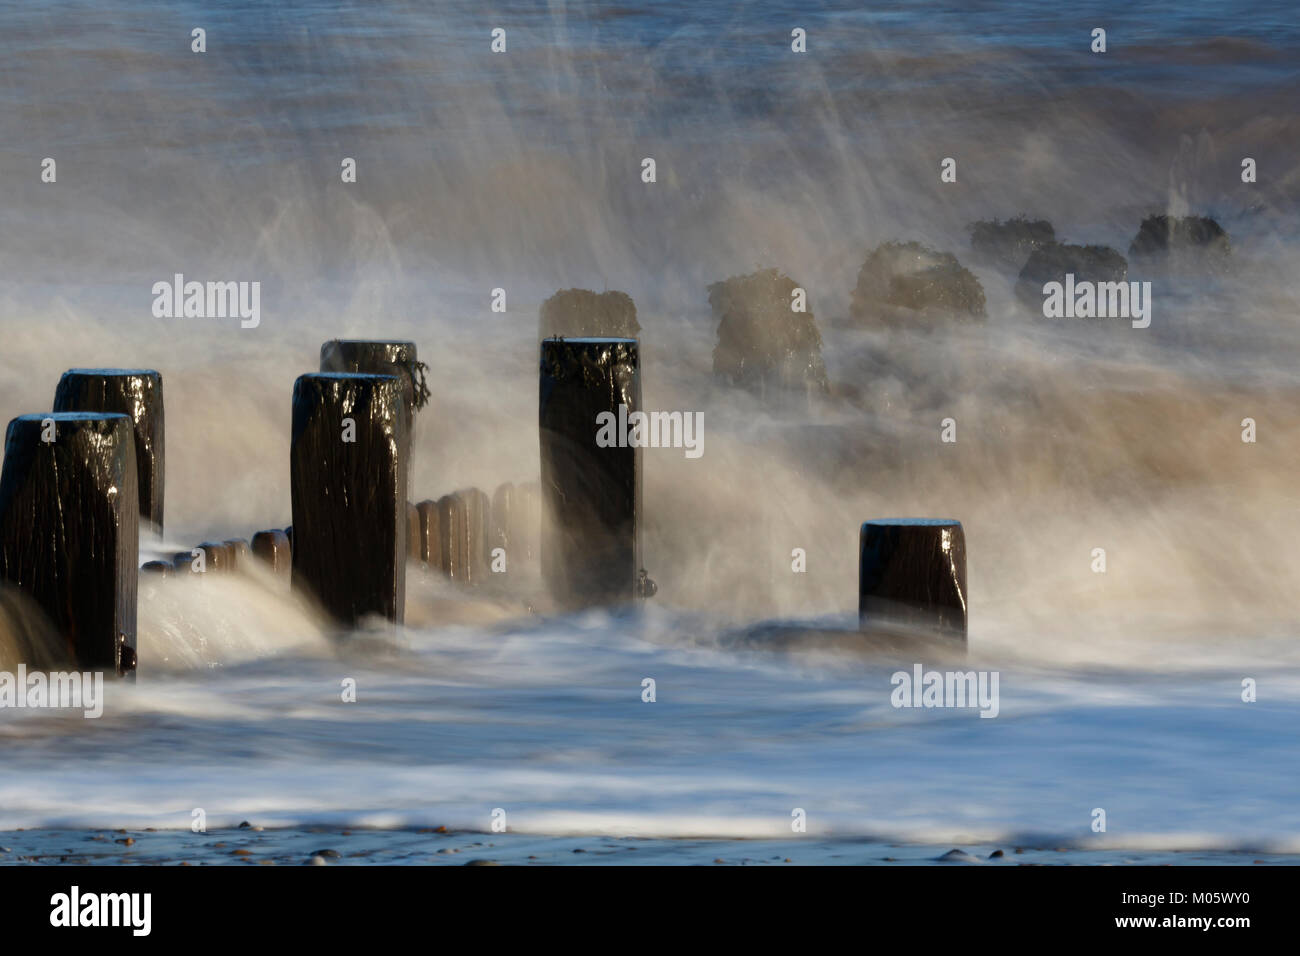 Breaking waves in slow motion - artistic effect Stock Photo